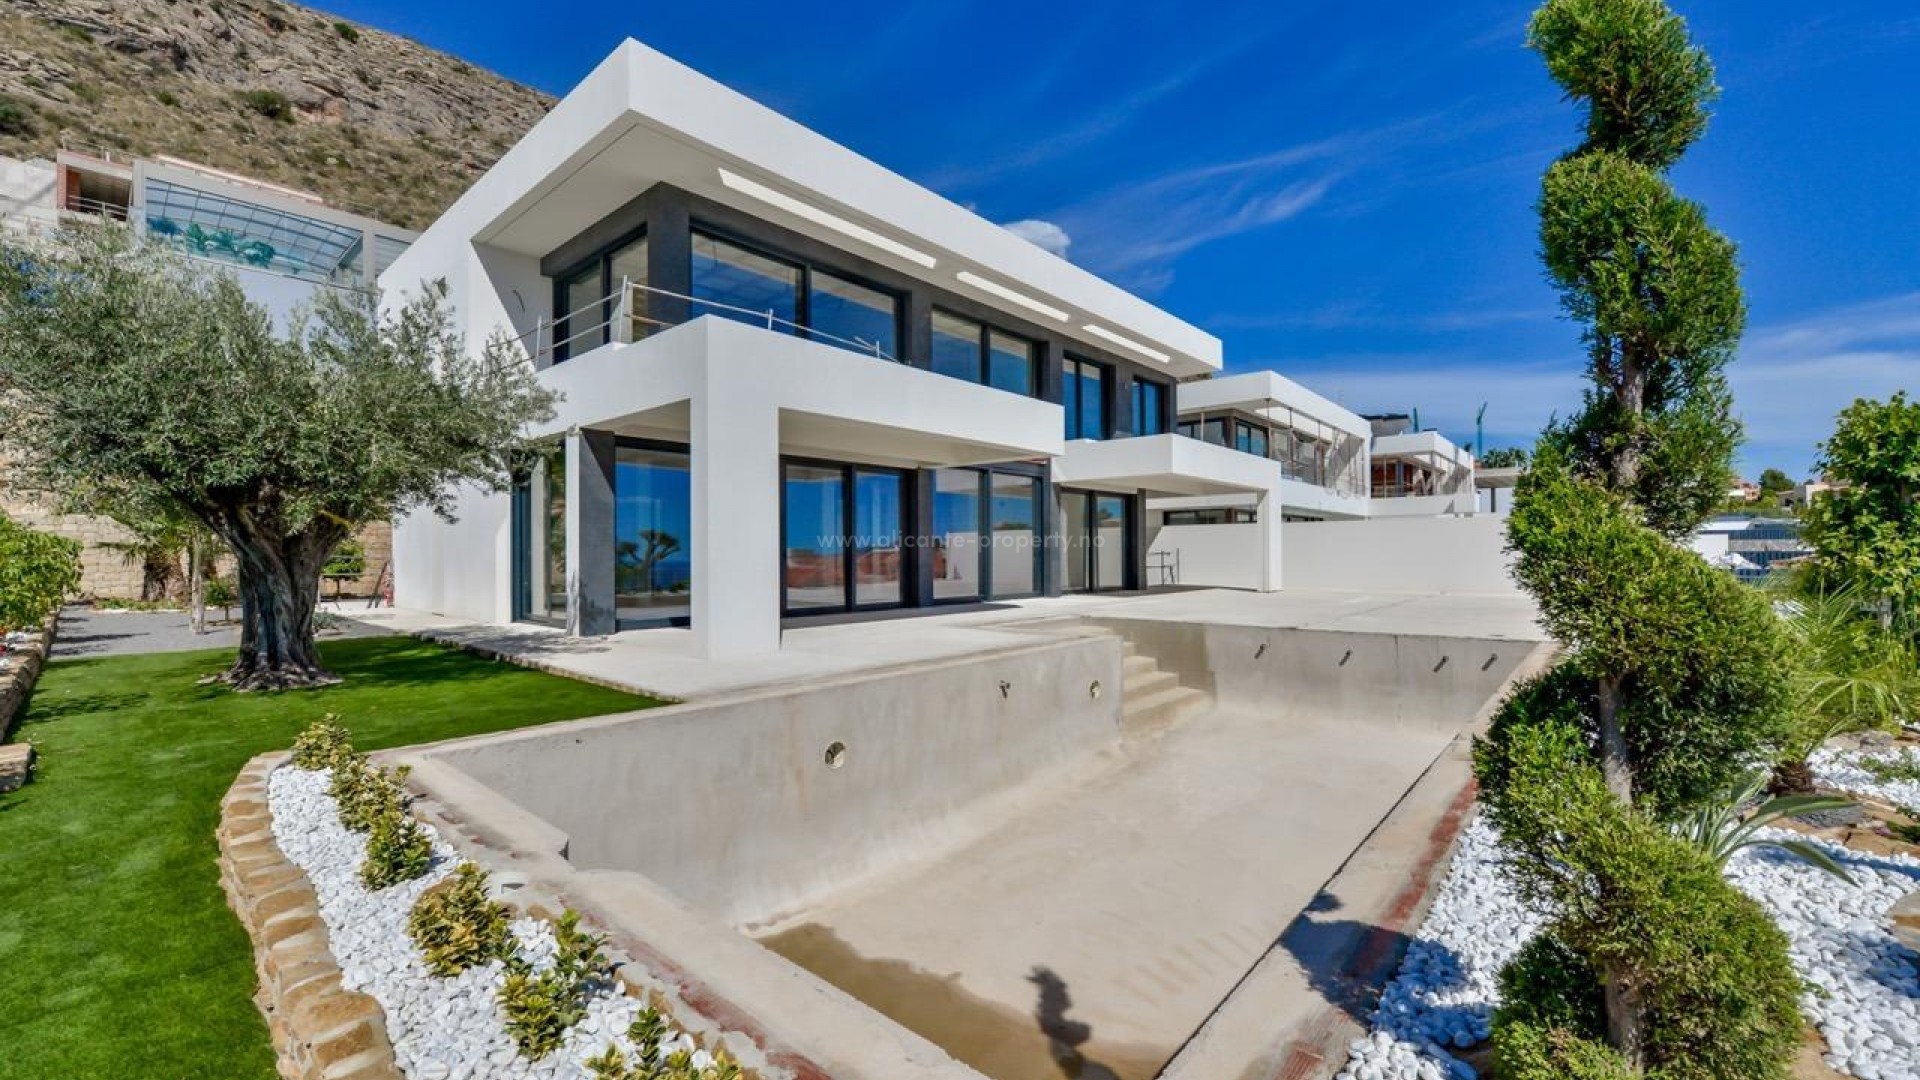 Luxury villa in Sierra Cortina, Finestrat with 8 bedrooms, 5 bathrooms, 998 m2, fantastic swimming pool of 54 m2, panoramic sea views, 2 covered terraces